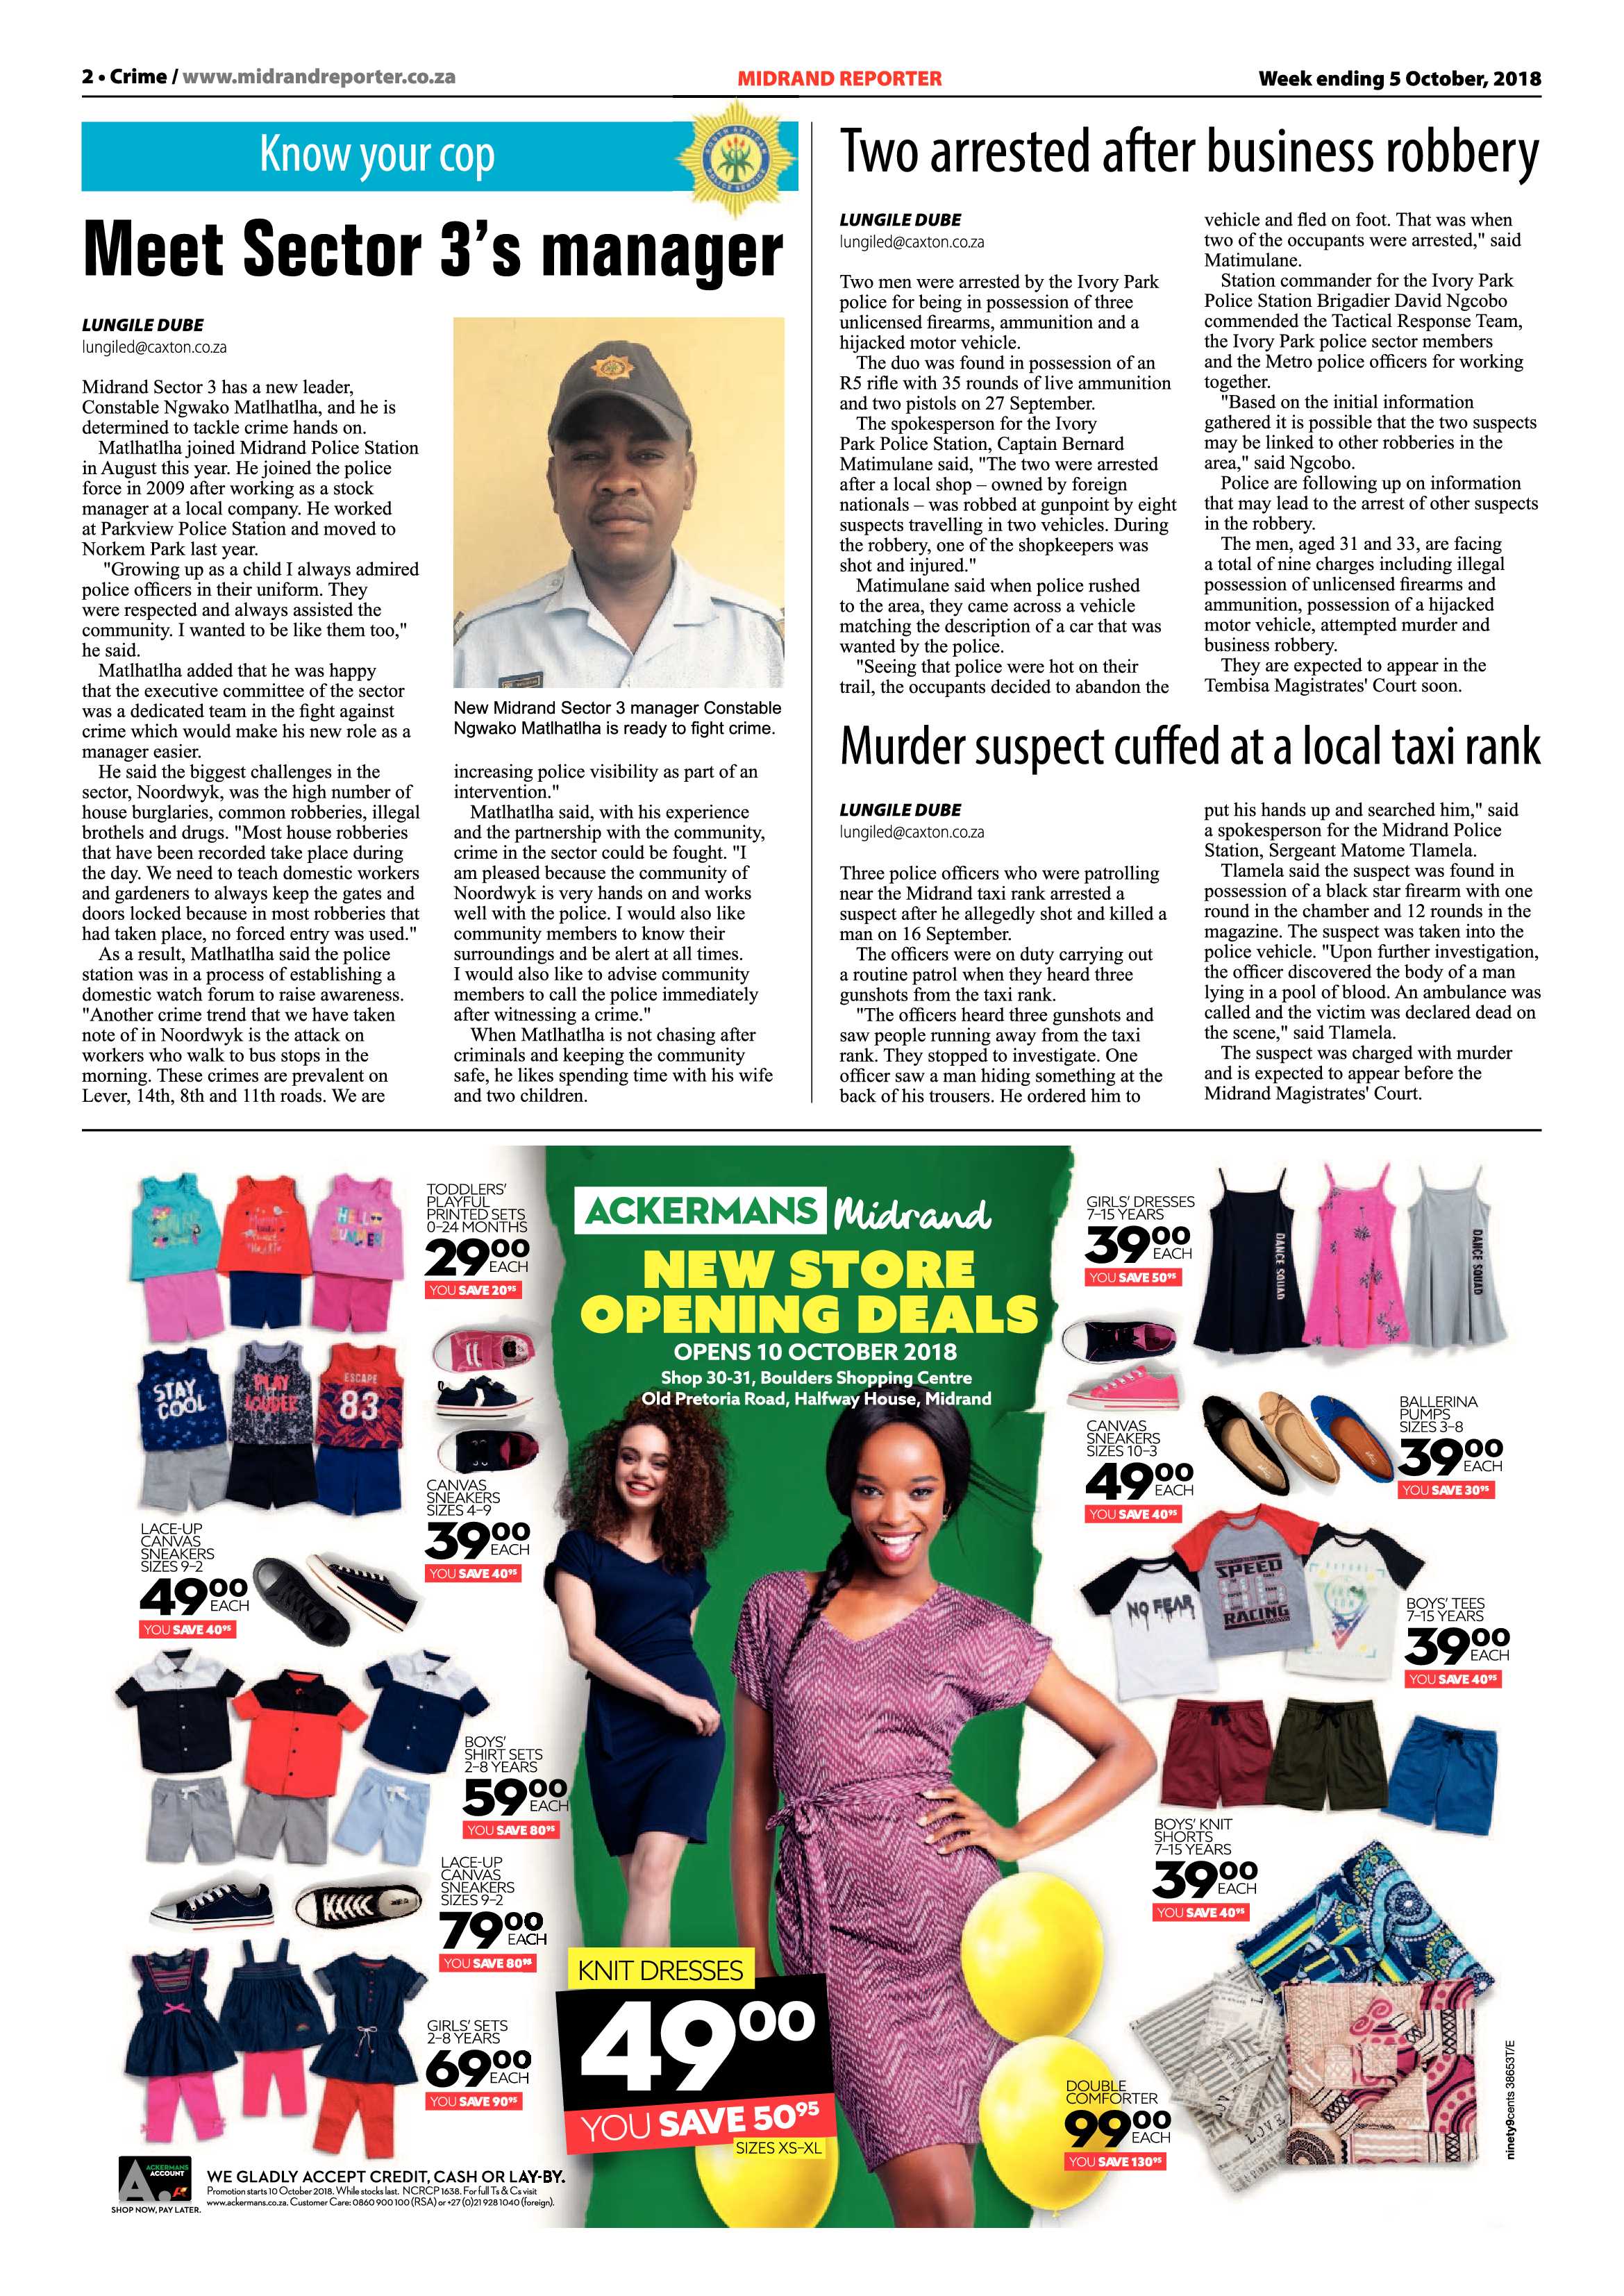 Midrand Reporter 5 October, 2018 page 2